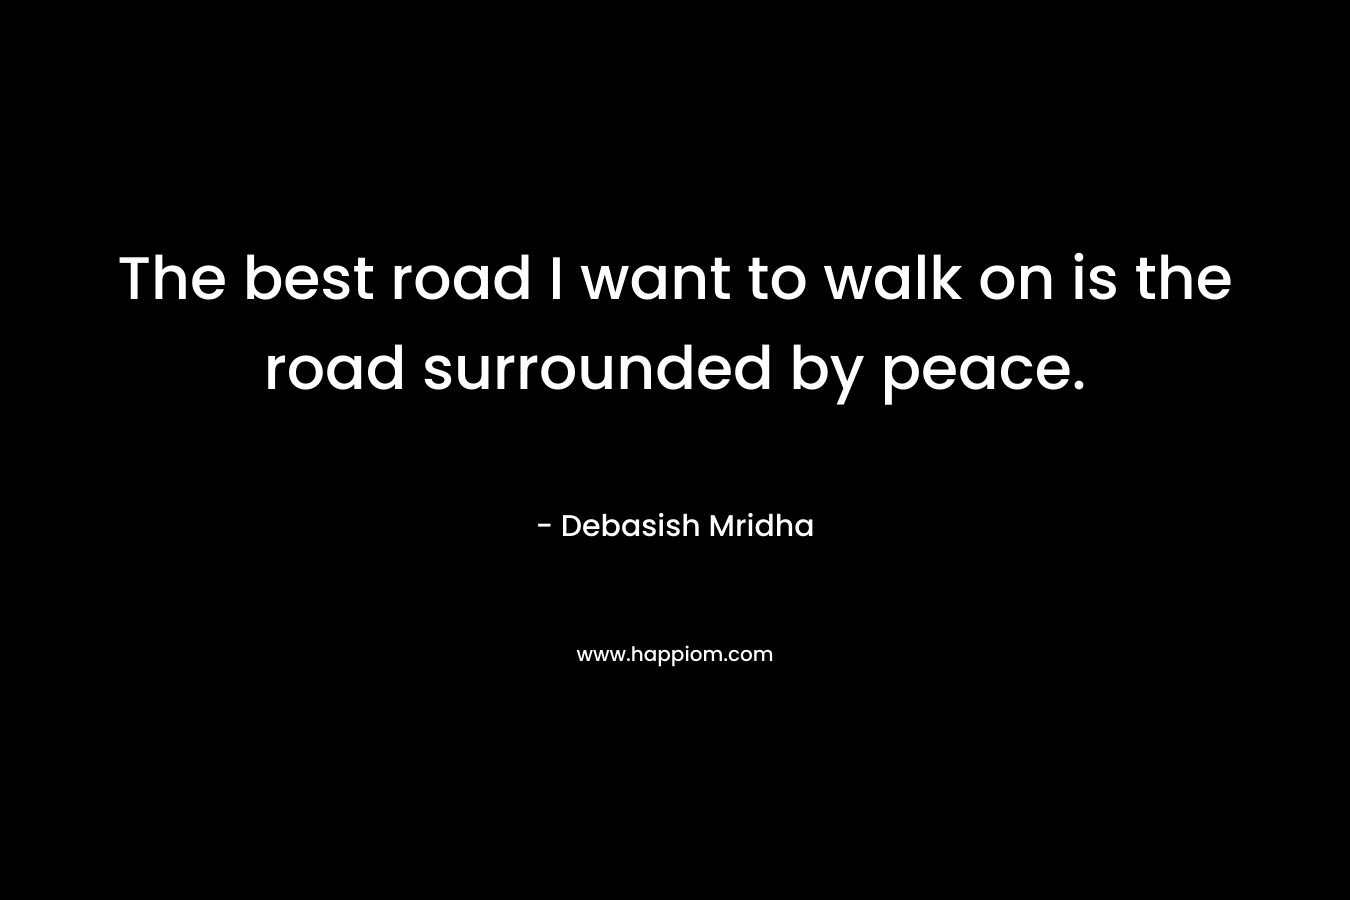 The best road I want to walk on is the road surrounded by peace.